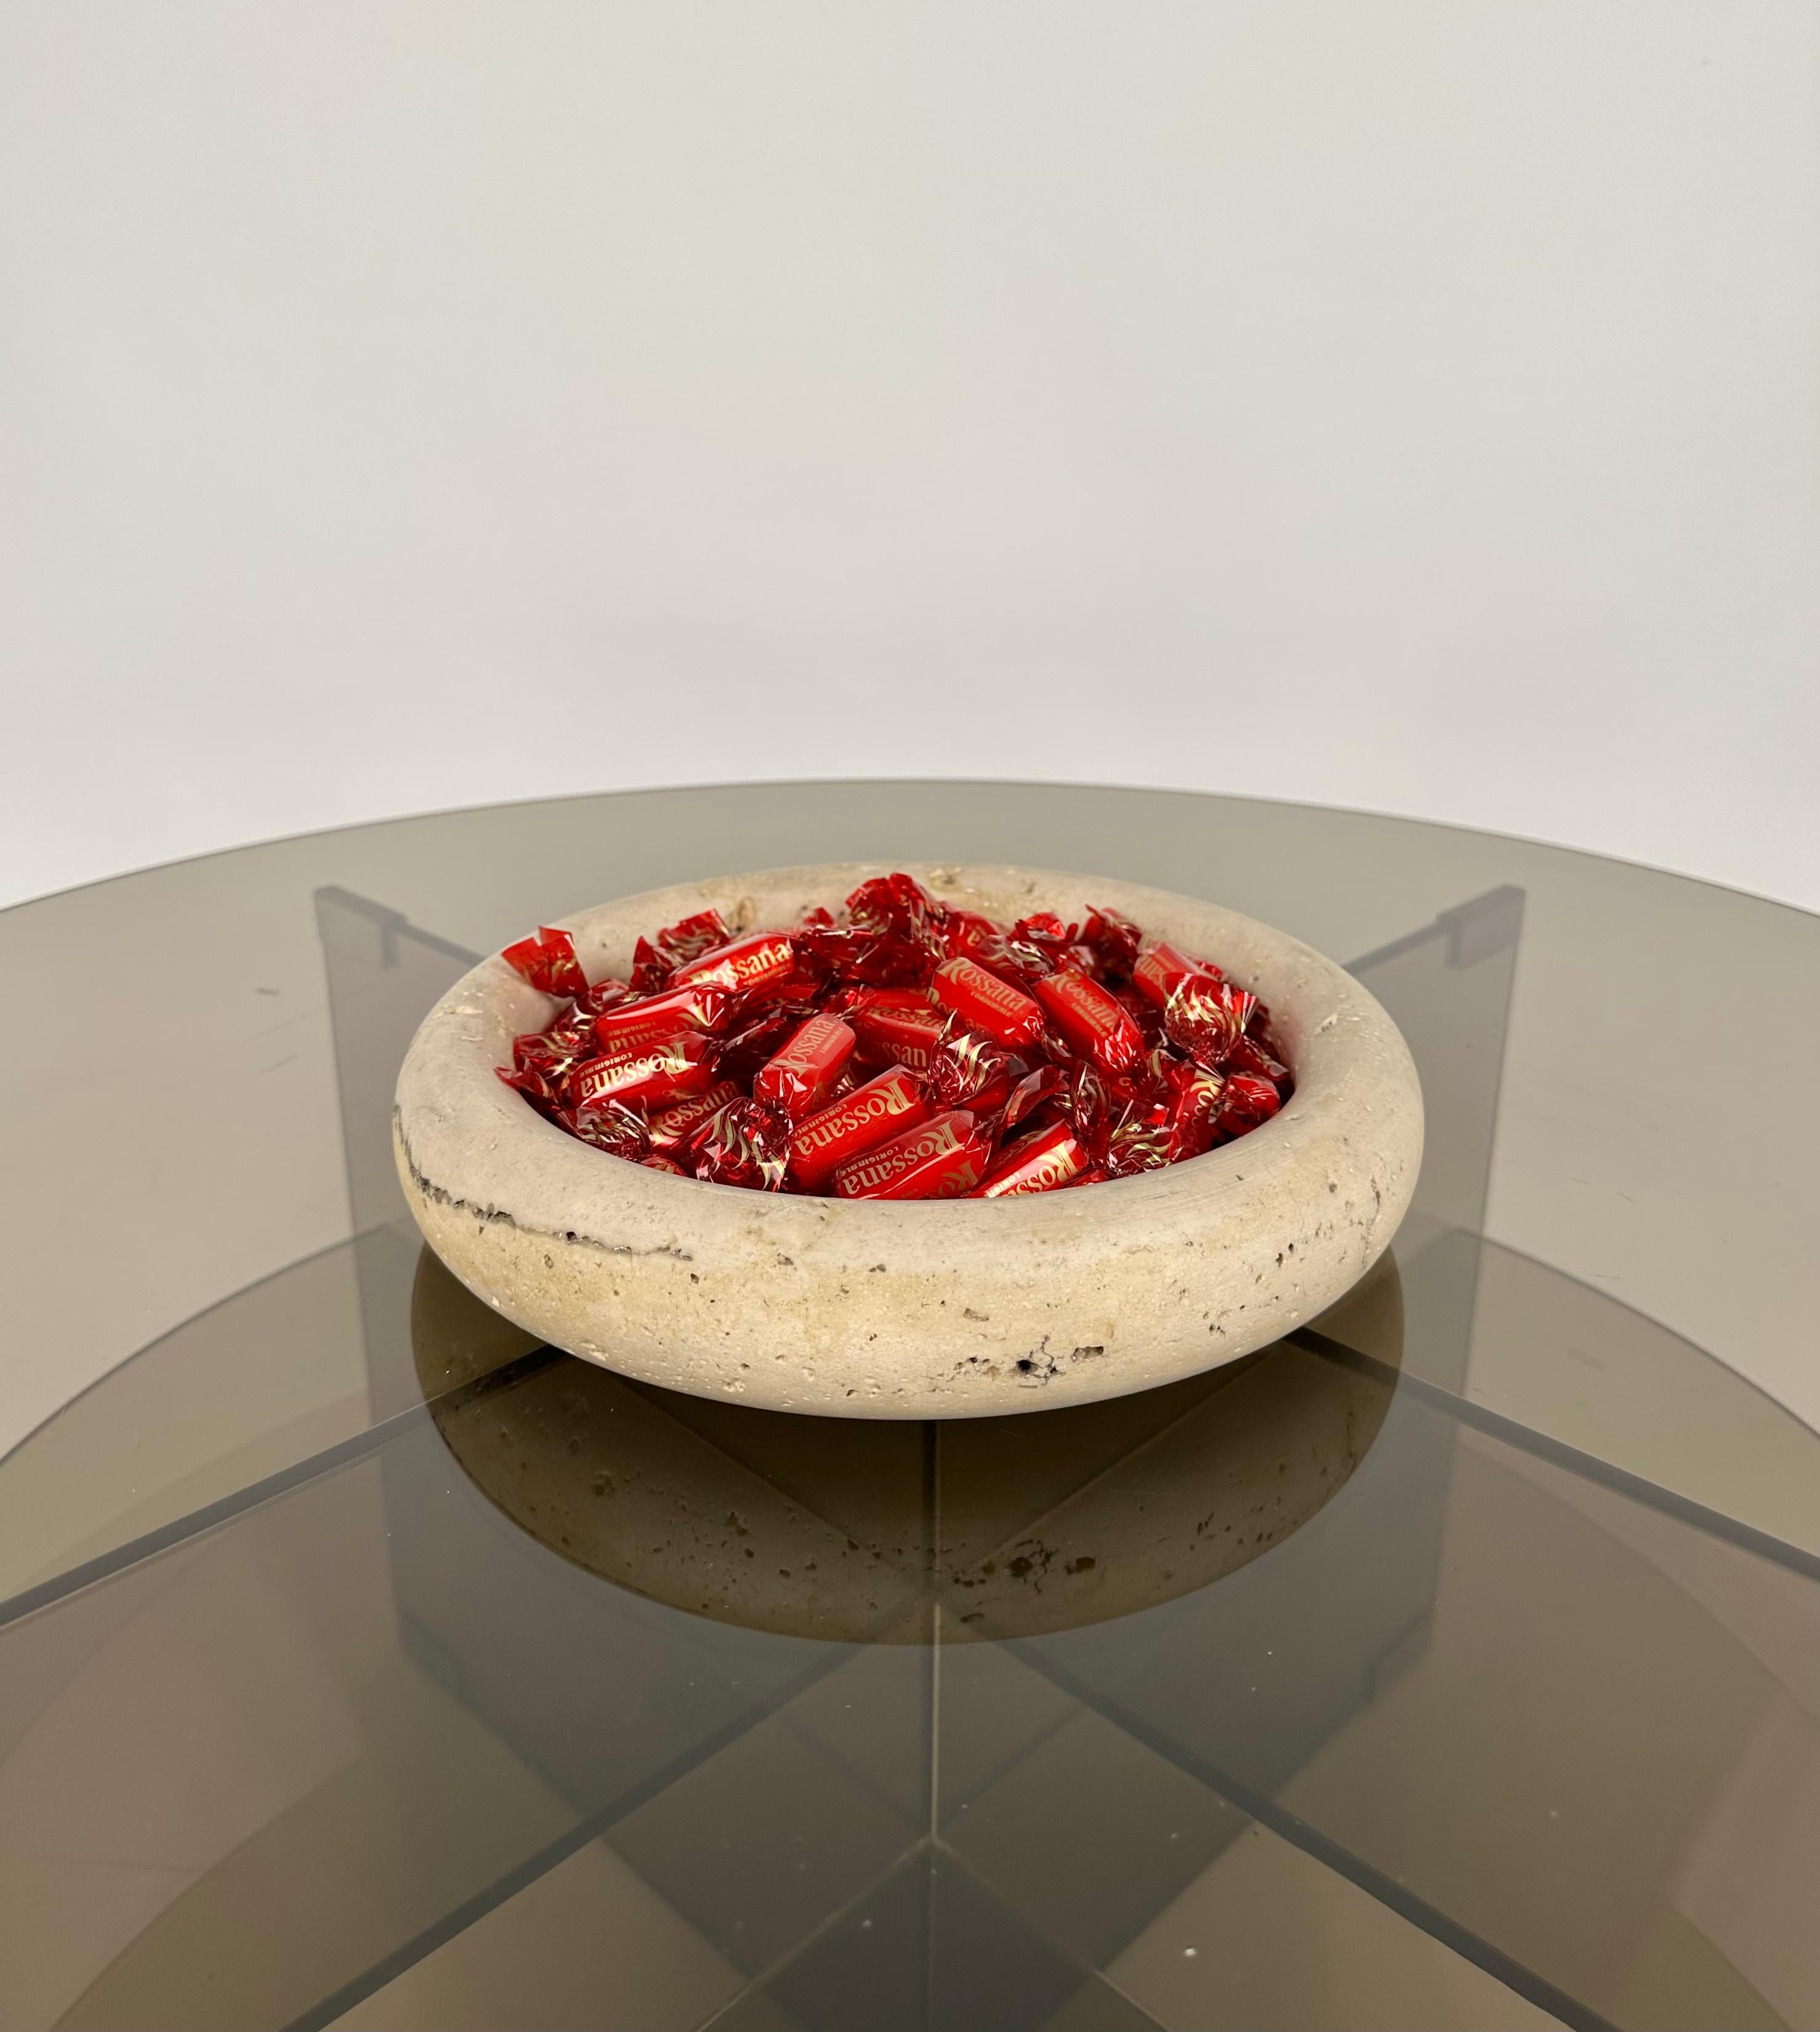 Italian Midcentury Round Vide-Poche Dish in Travertine by Fratelli Mannelli, Italy 1970s For Sale